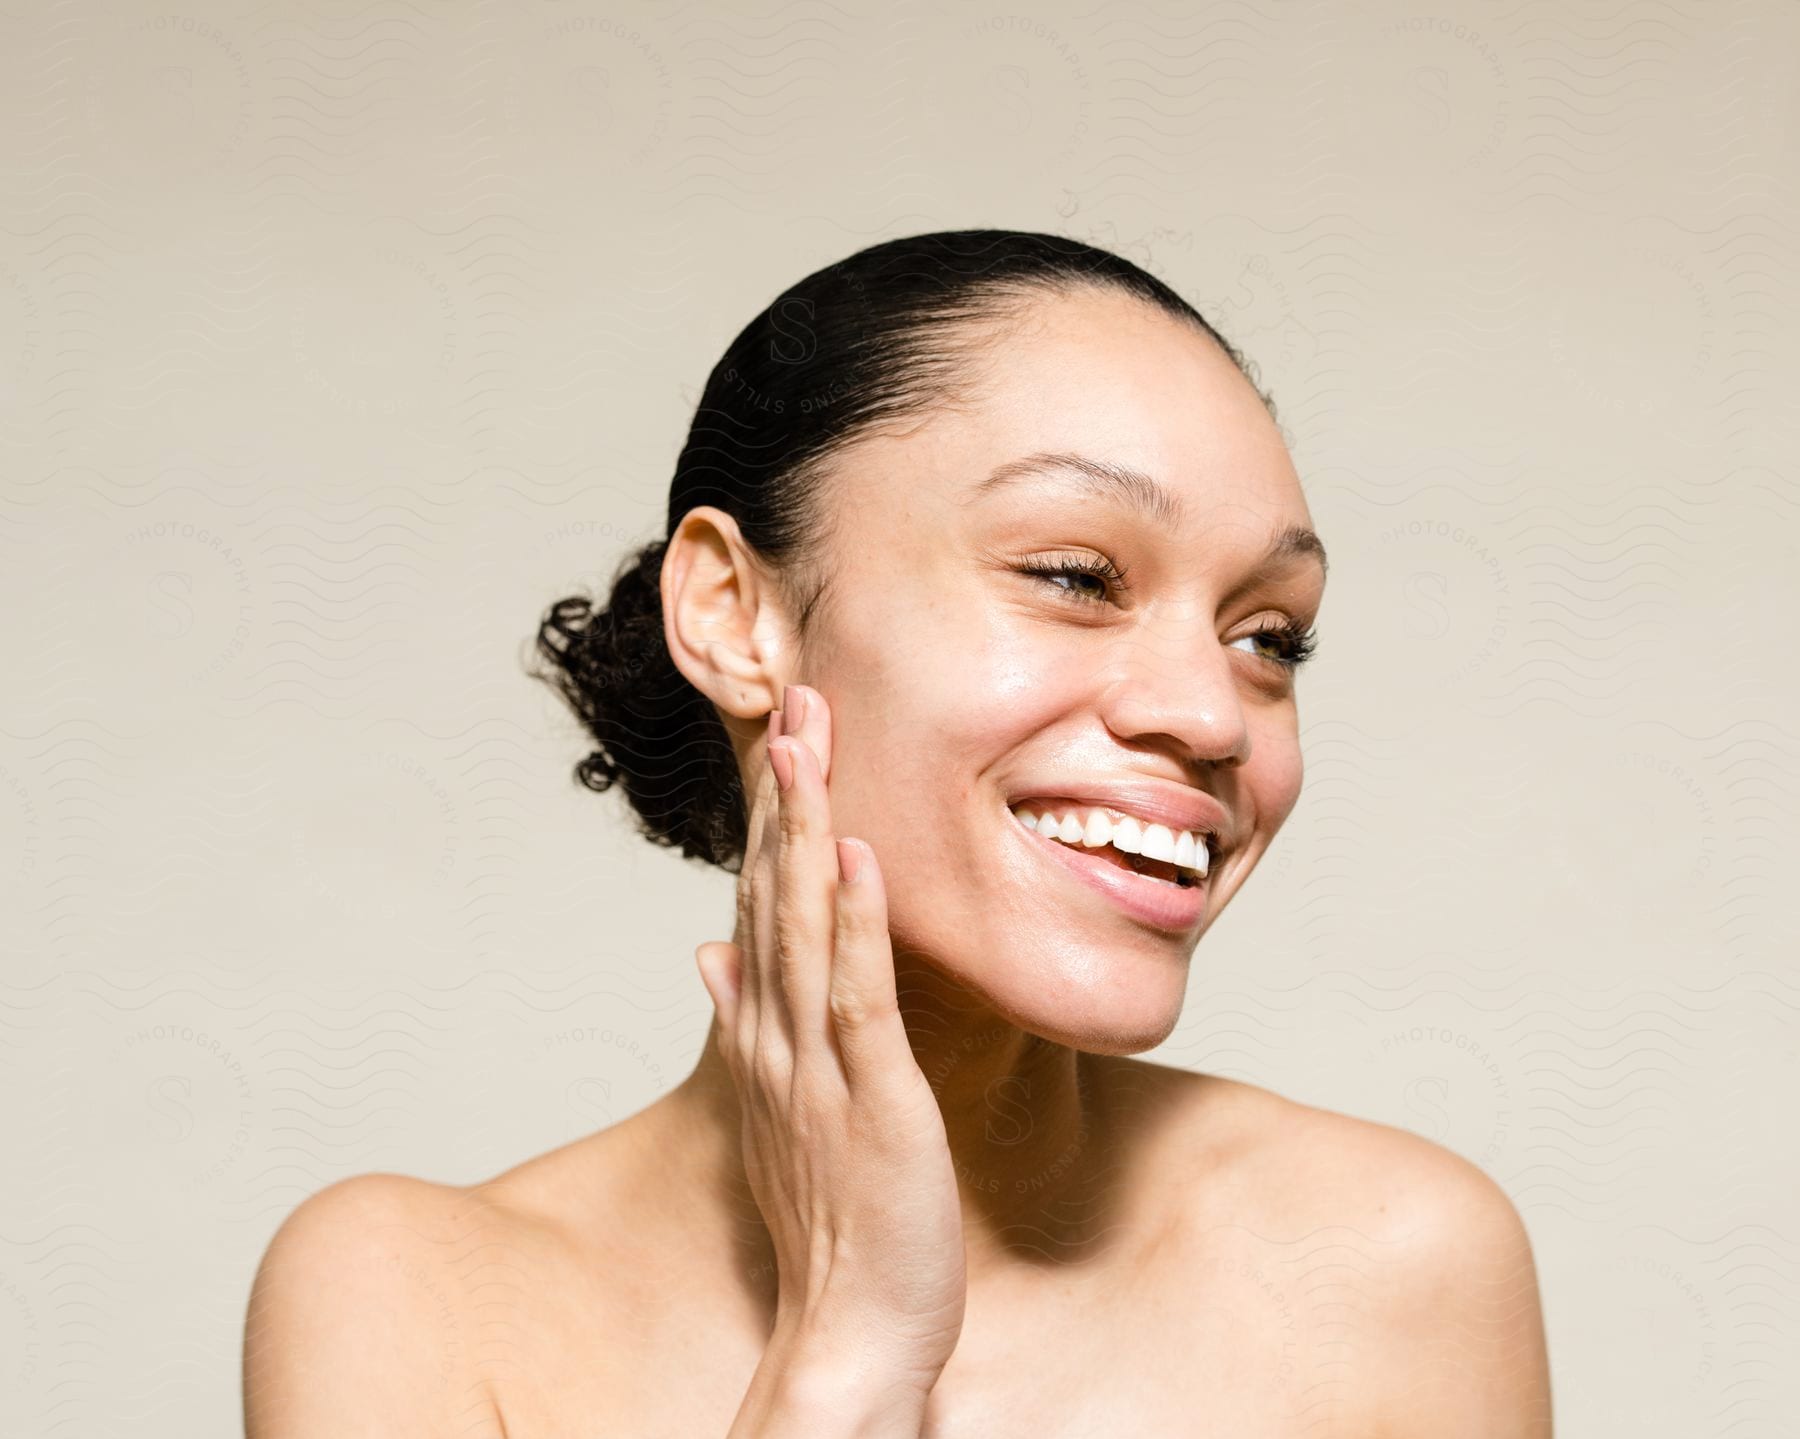 A woman smiling while touching her face